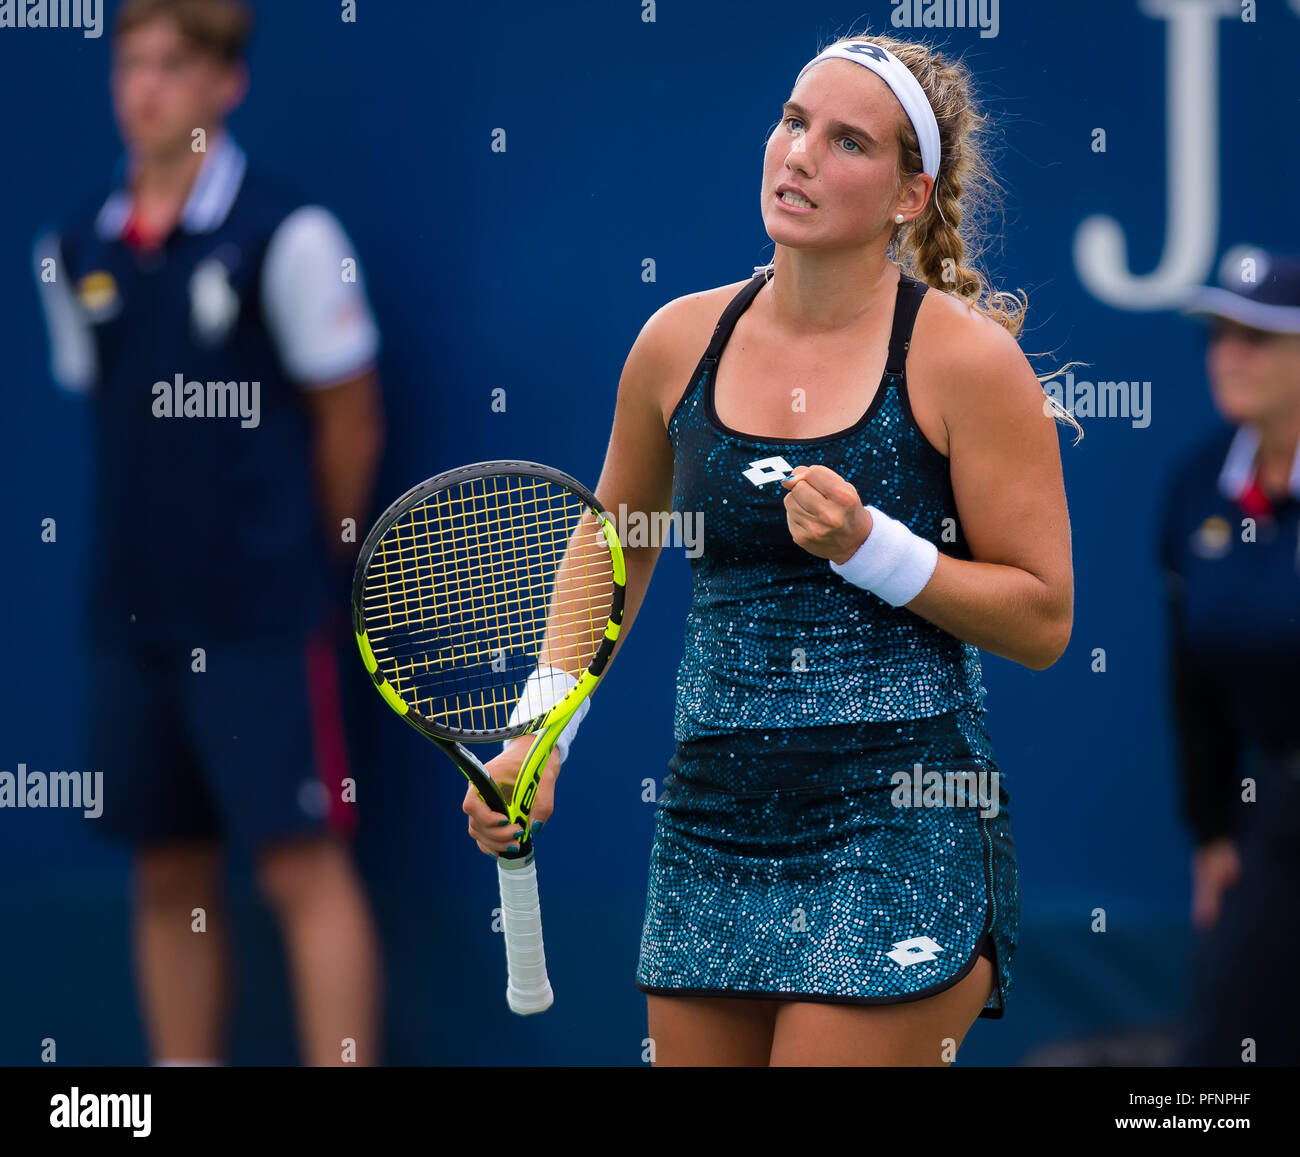 Deborah Chiesa of Italy in action during the first qualification round at  the 2018 US Open Grand Slam tennis tournament. New York, USA. August 22th  2018. 22nd Aug, 2018. Credit: AFP7/ZUMA Wire/Alamy